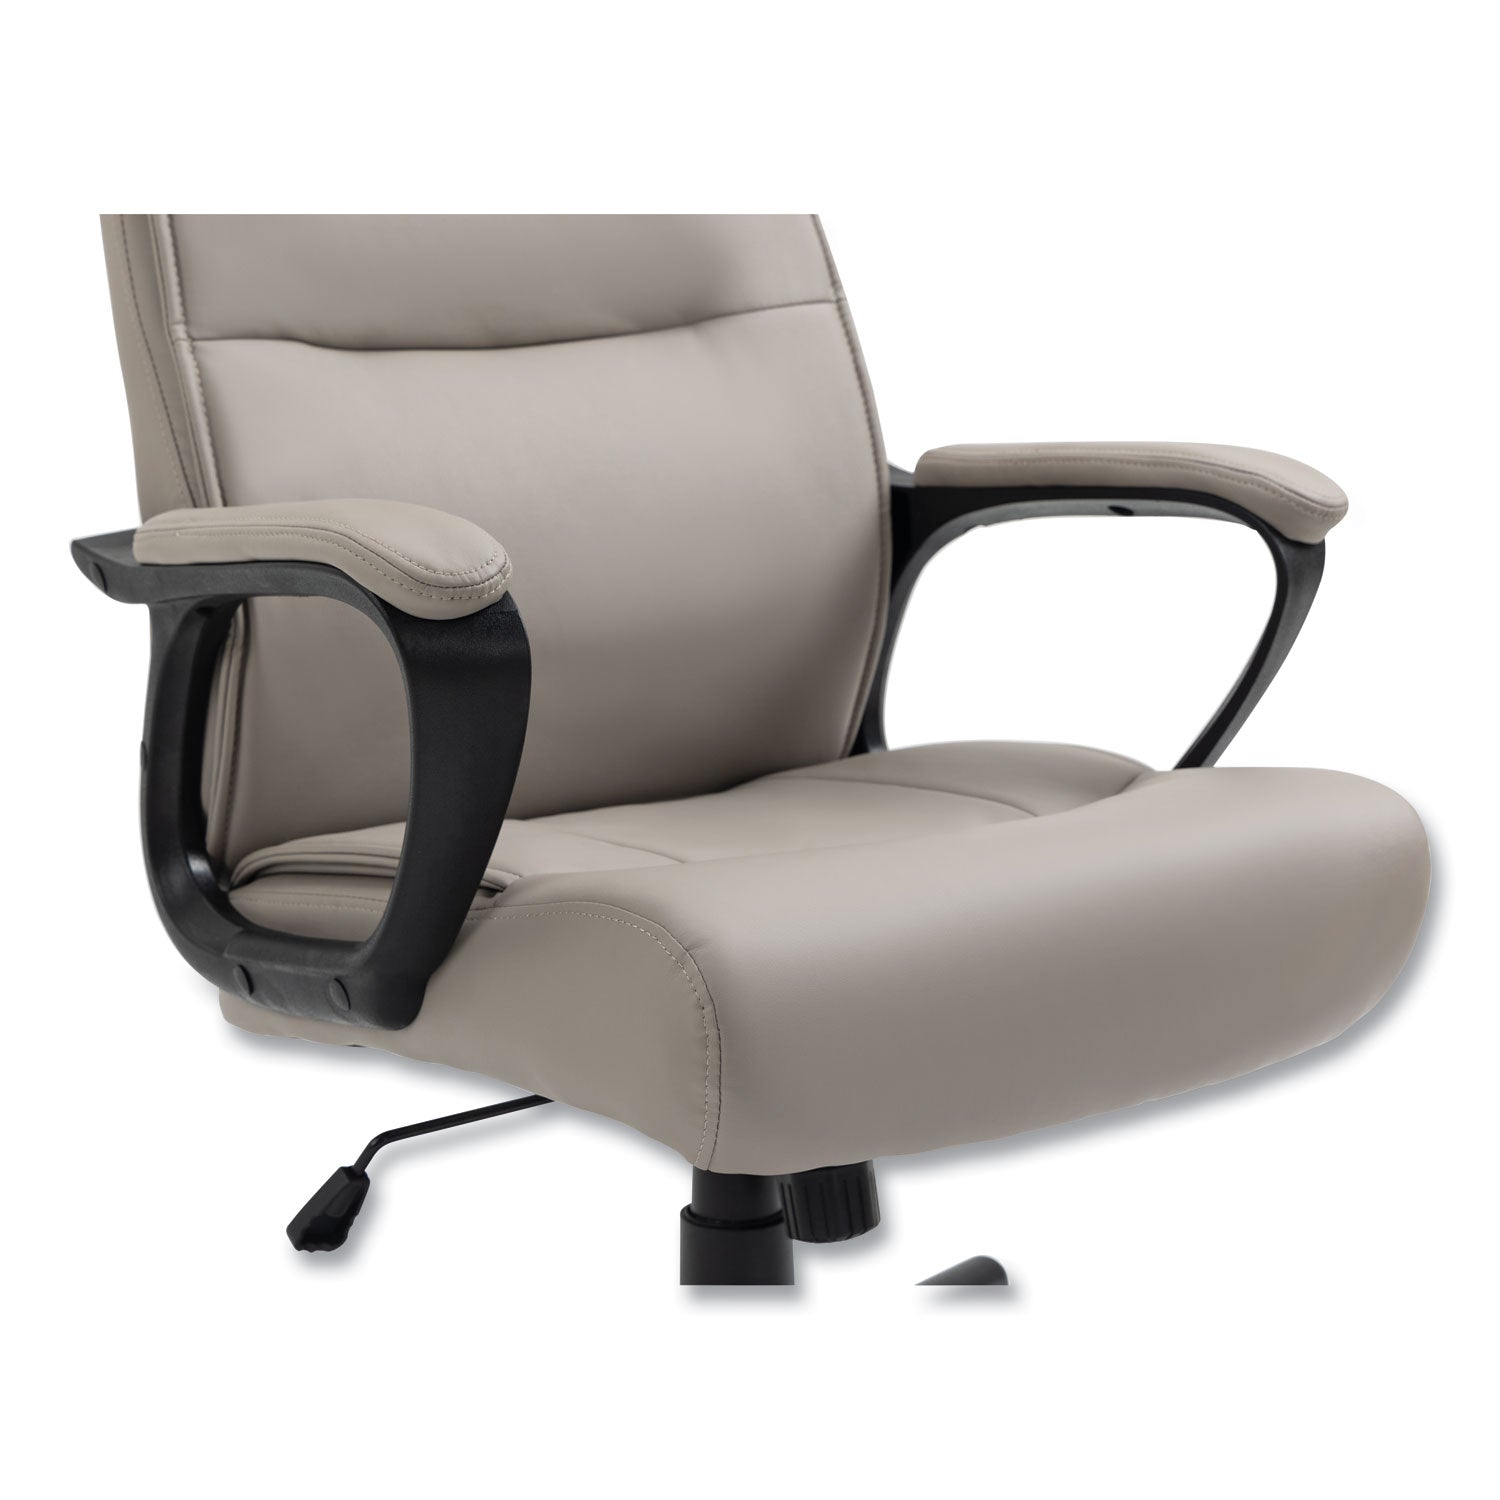 alera-oxnam-series-high-back-task-chair-supports-up-to-275-lbs-1756-to-2138-seat-height-tan-seat-back-black-base_aleon41b59 - 7